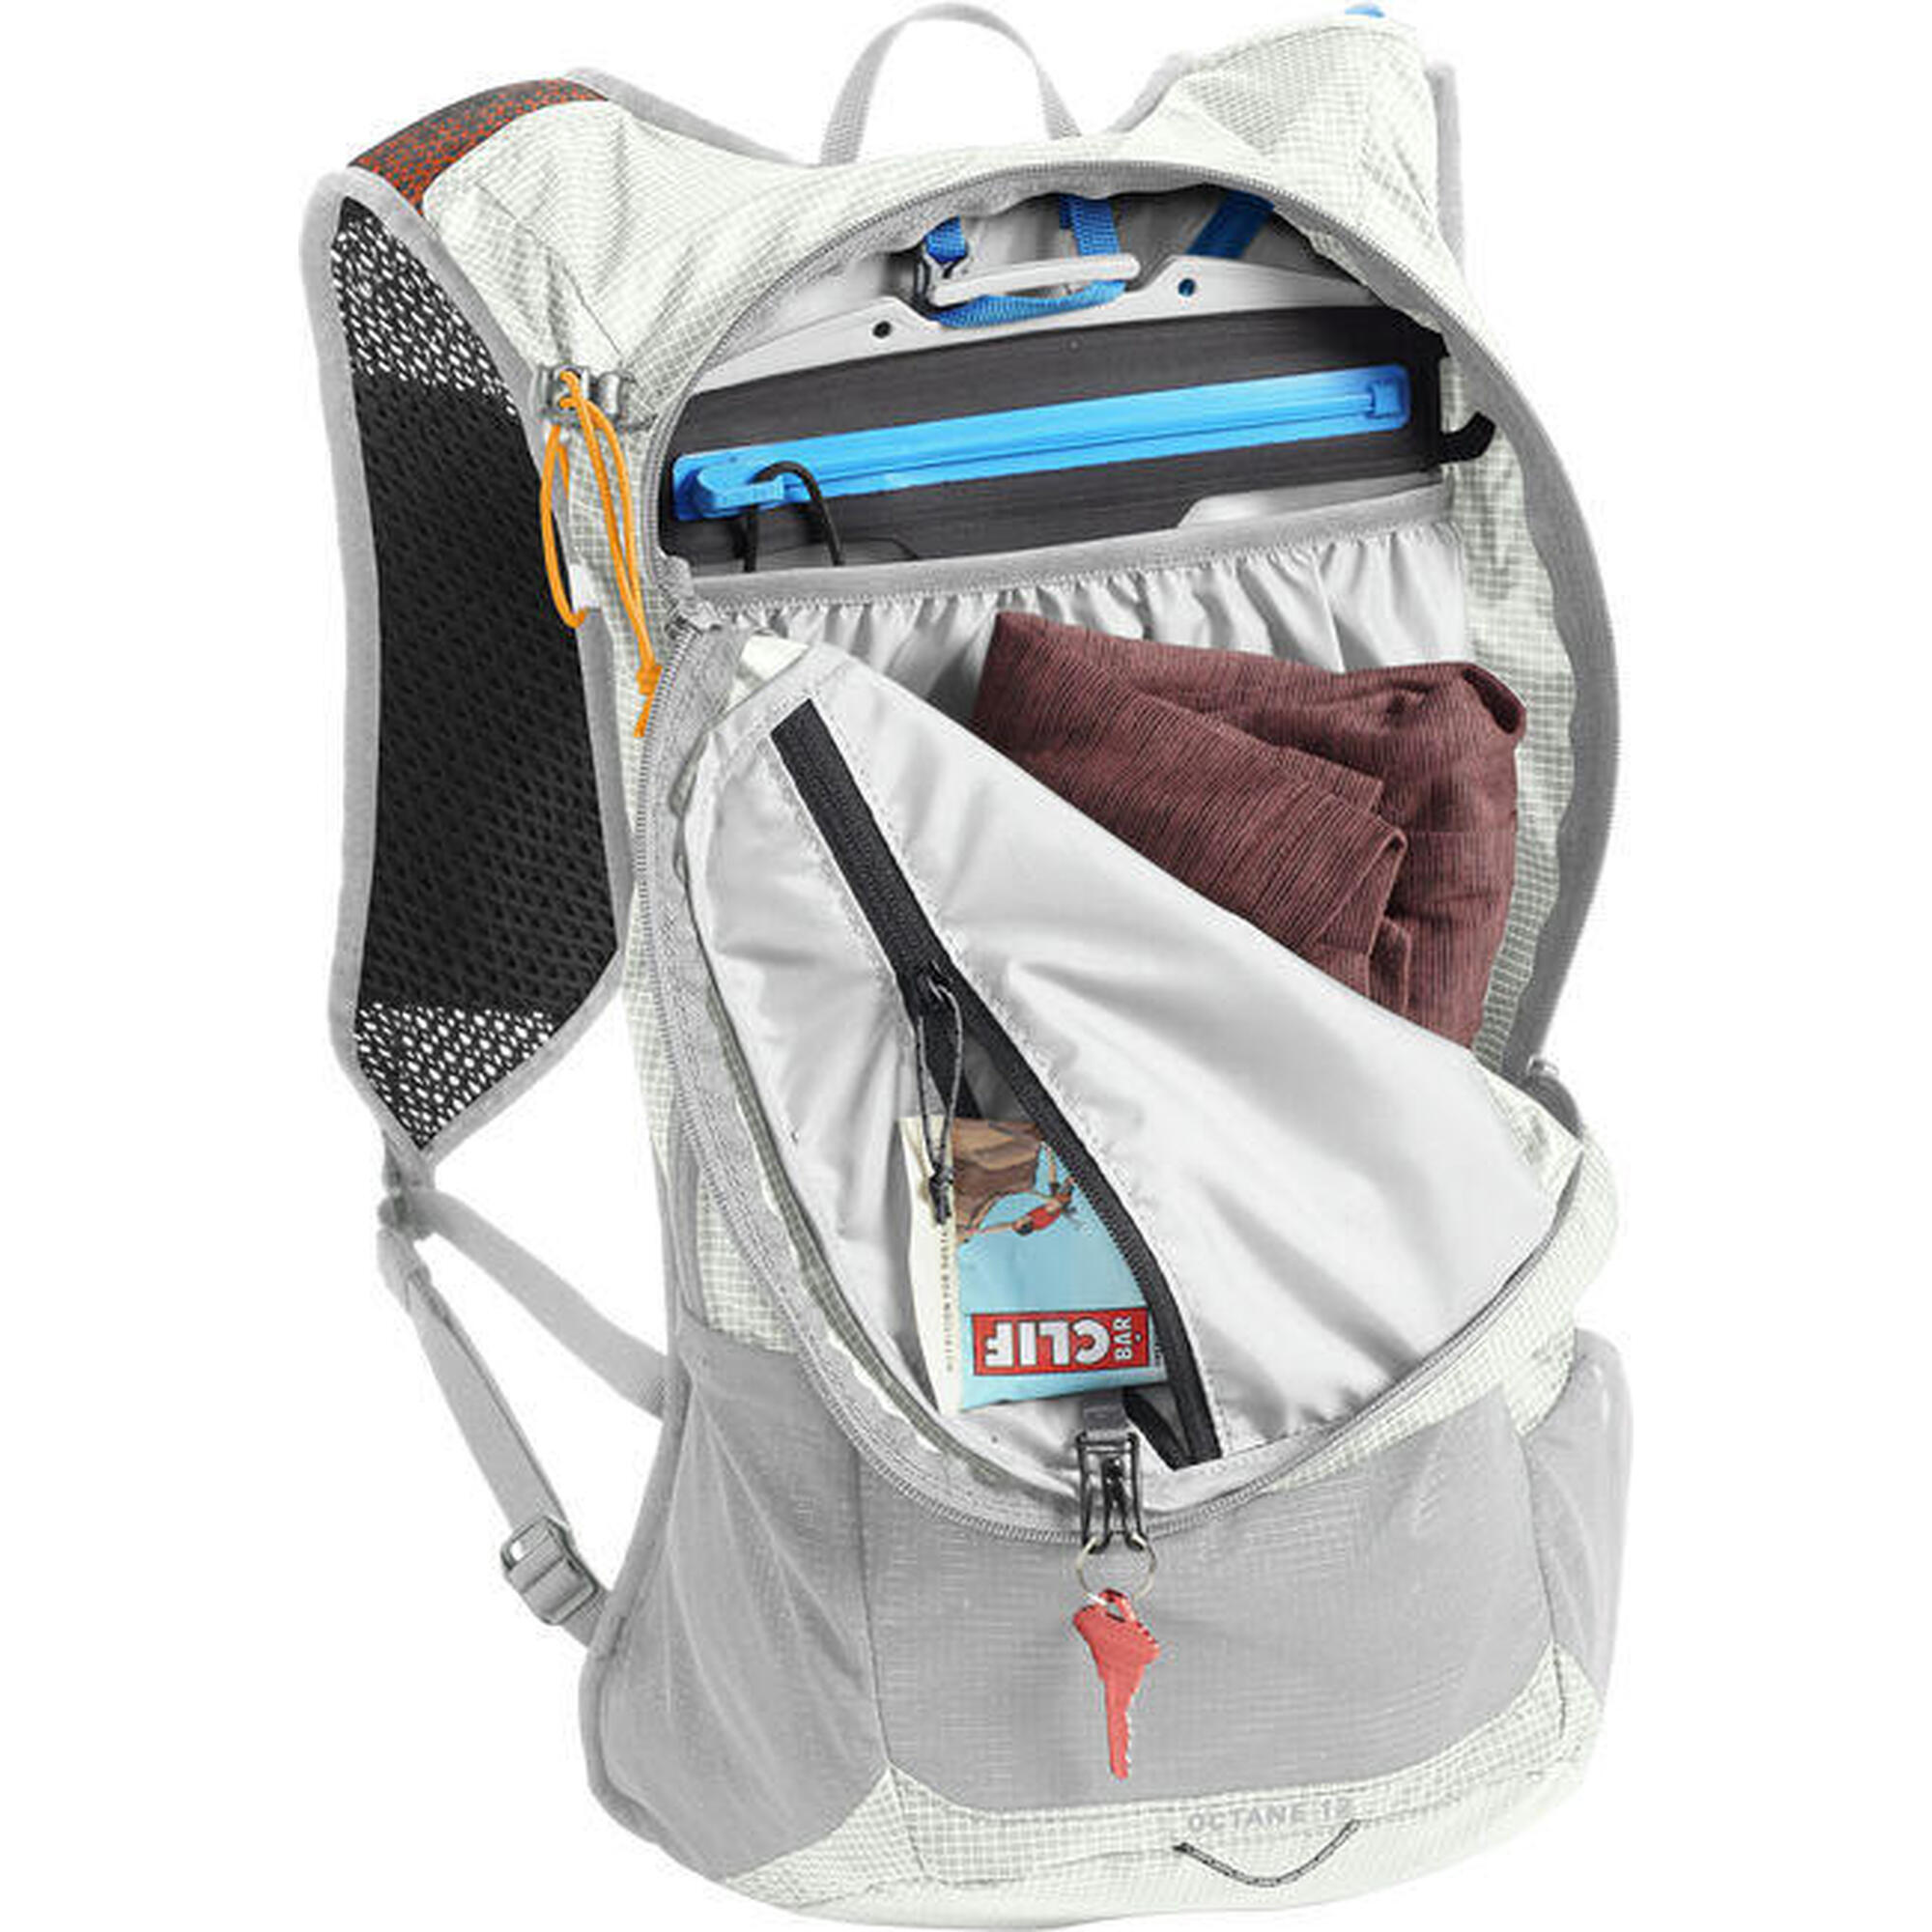 Rucsac Octane™ 12 Hydration Hiking Pack with Fusion™ Reservoir - Vapor/Apricot